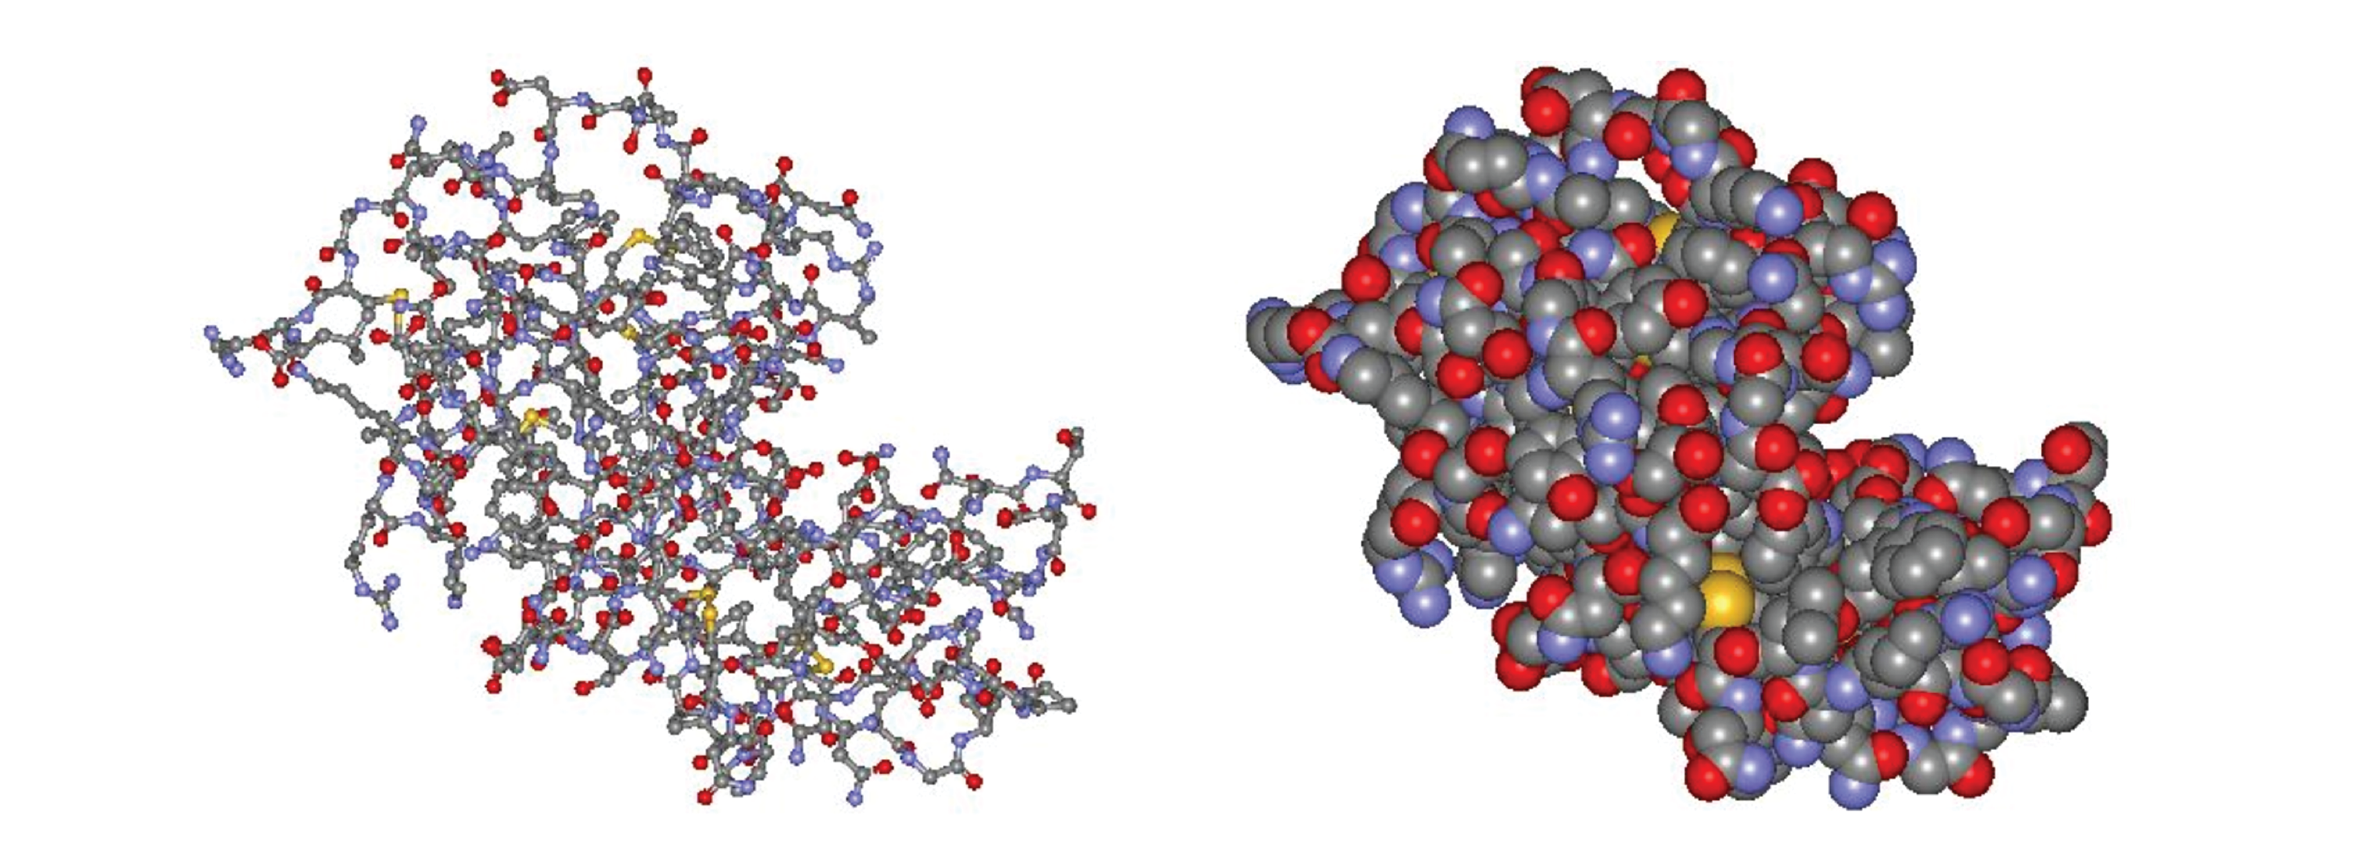 Ball-and-stick (left) and spacefilling (right) models of lysozyme, an enzyme. Both models show a large globular protein with and indentation (cleft) in the middle of the right-hand side.